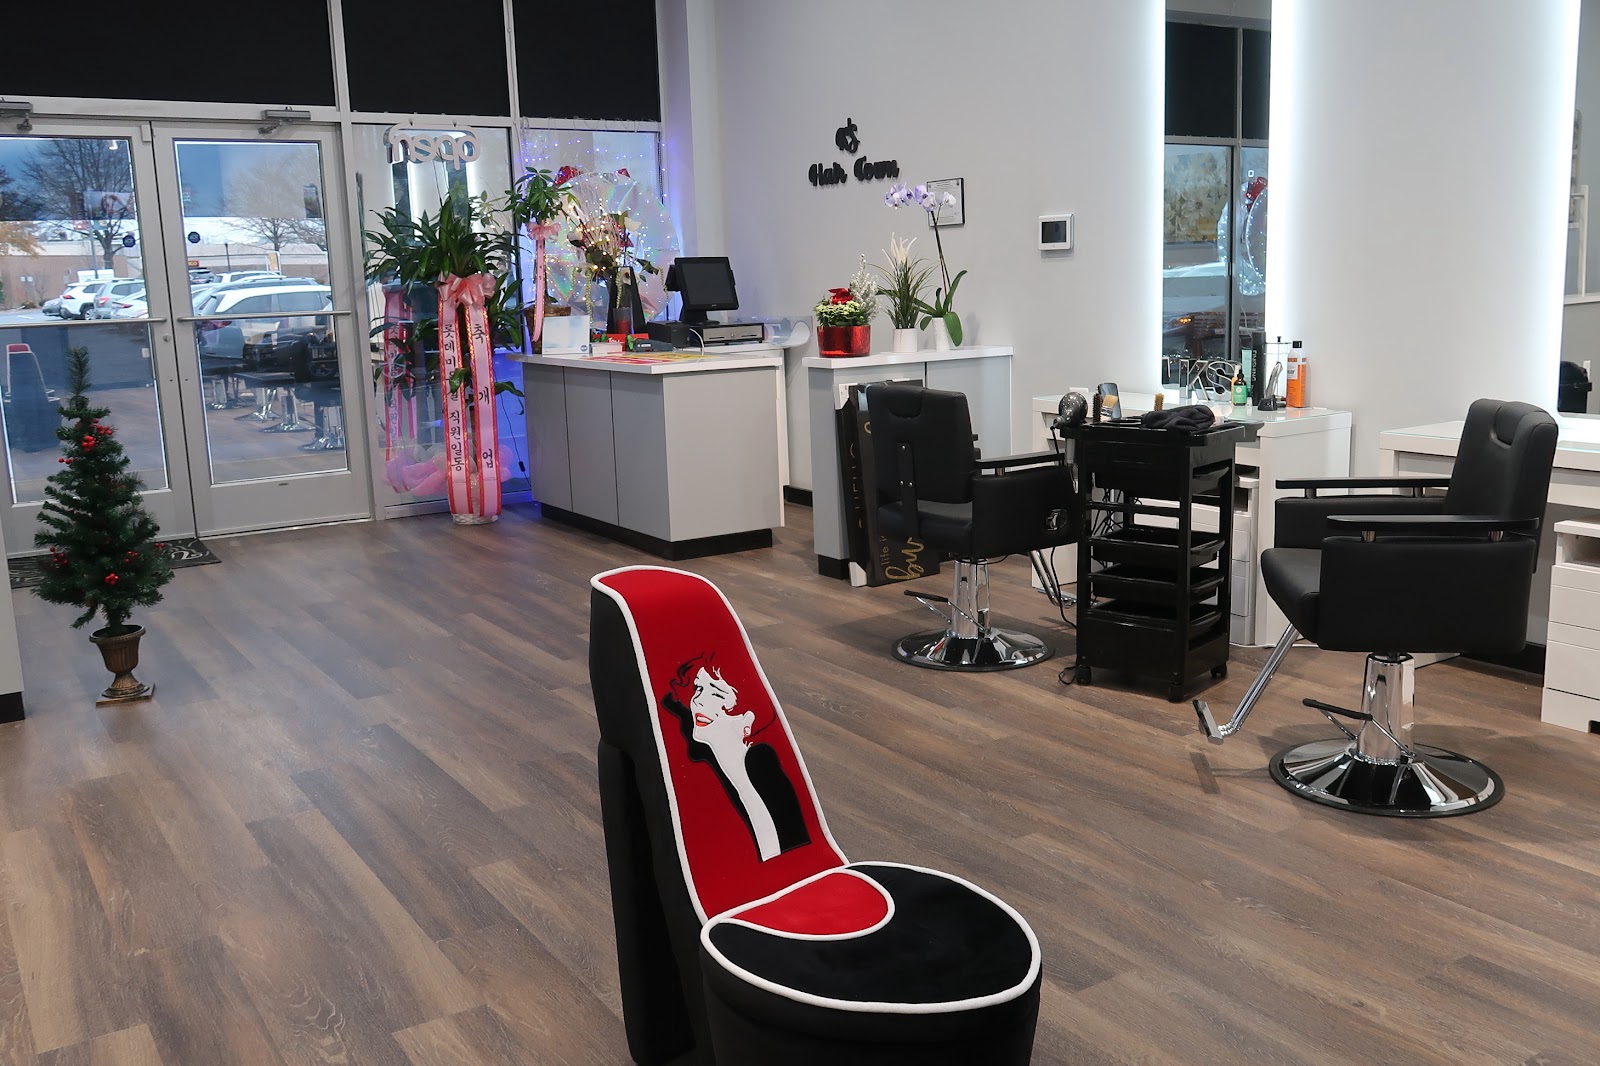 Unisex hair salon opens in Annandale | Annandale Today